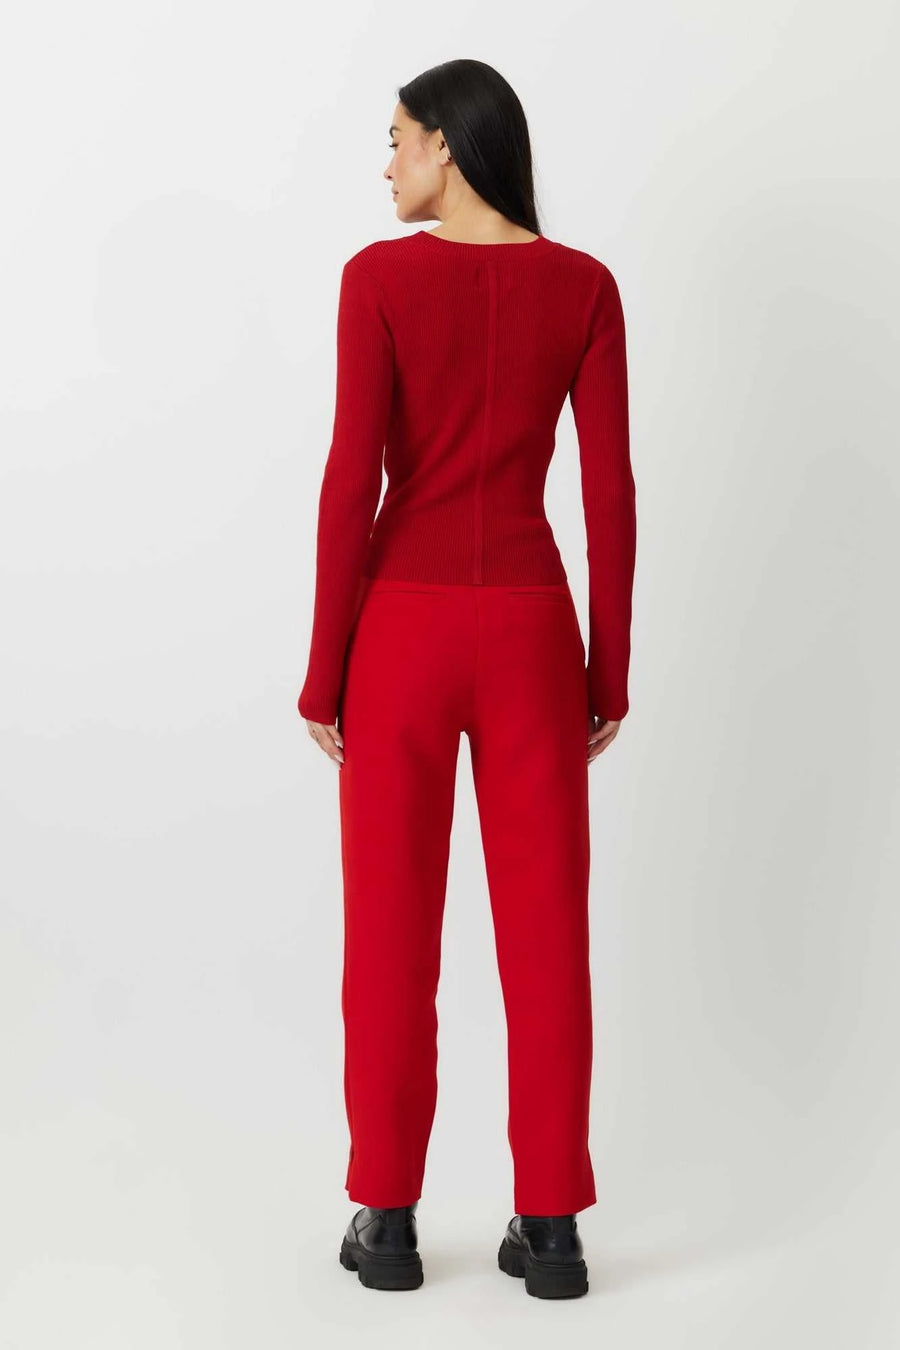 The Nelly straight leg trousers Japanese twill in lipstick red by Greyven 